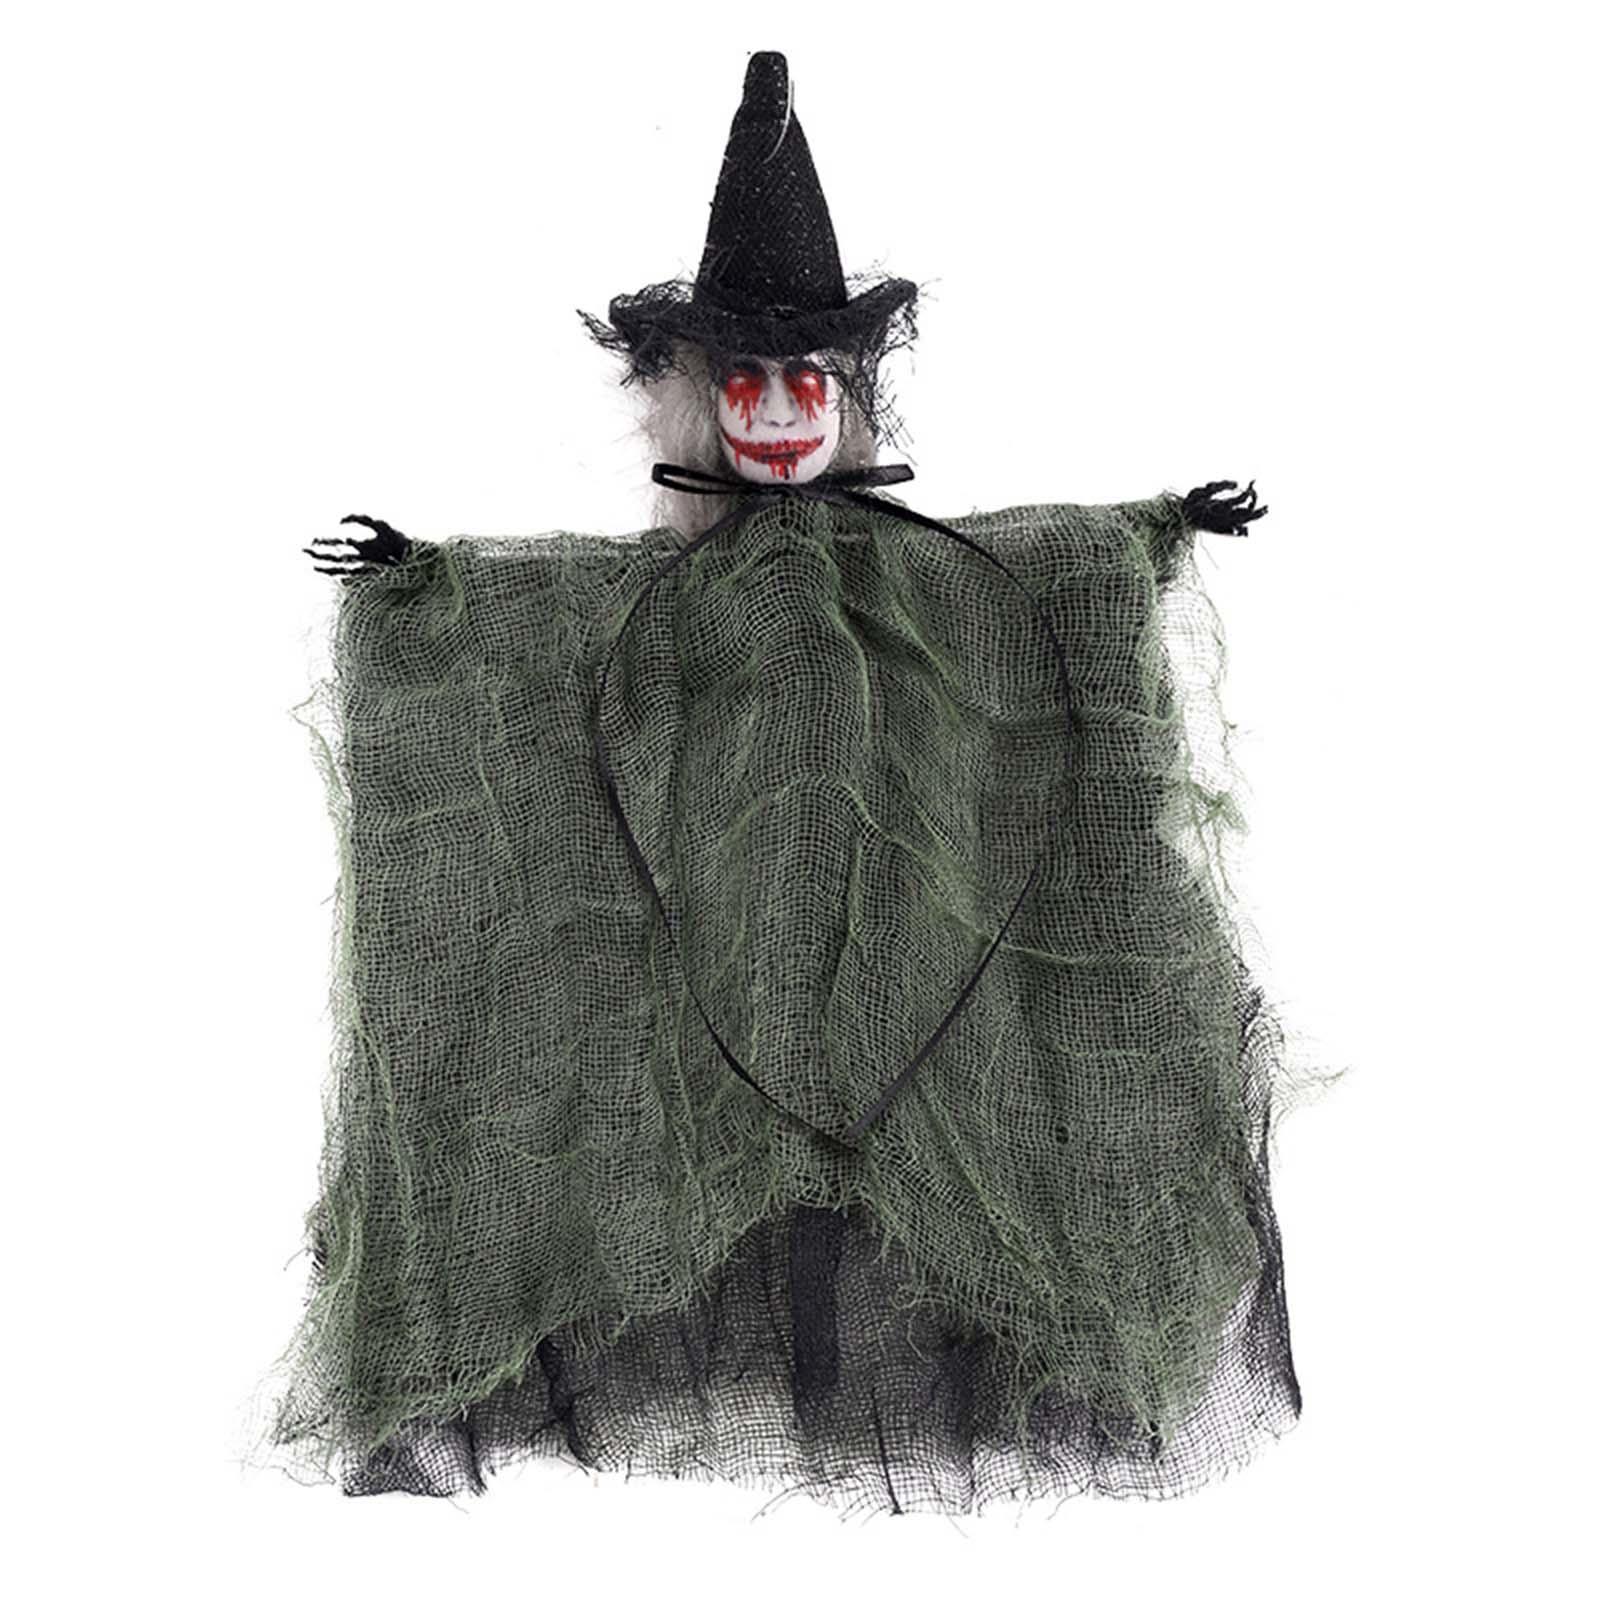 3 Pieces Halloween Hanging Witch Decorations Decorative for Garden Lawn Yard